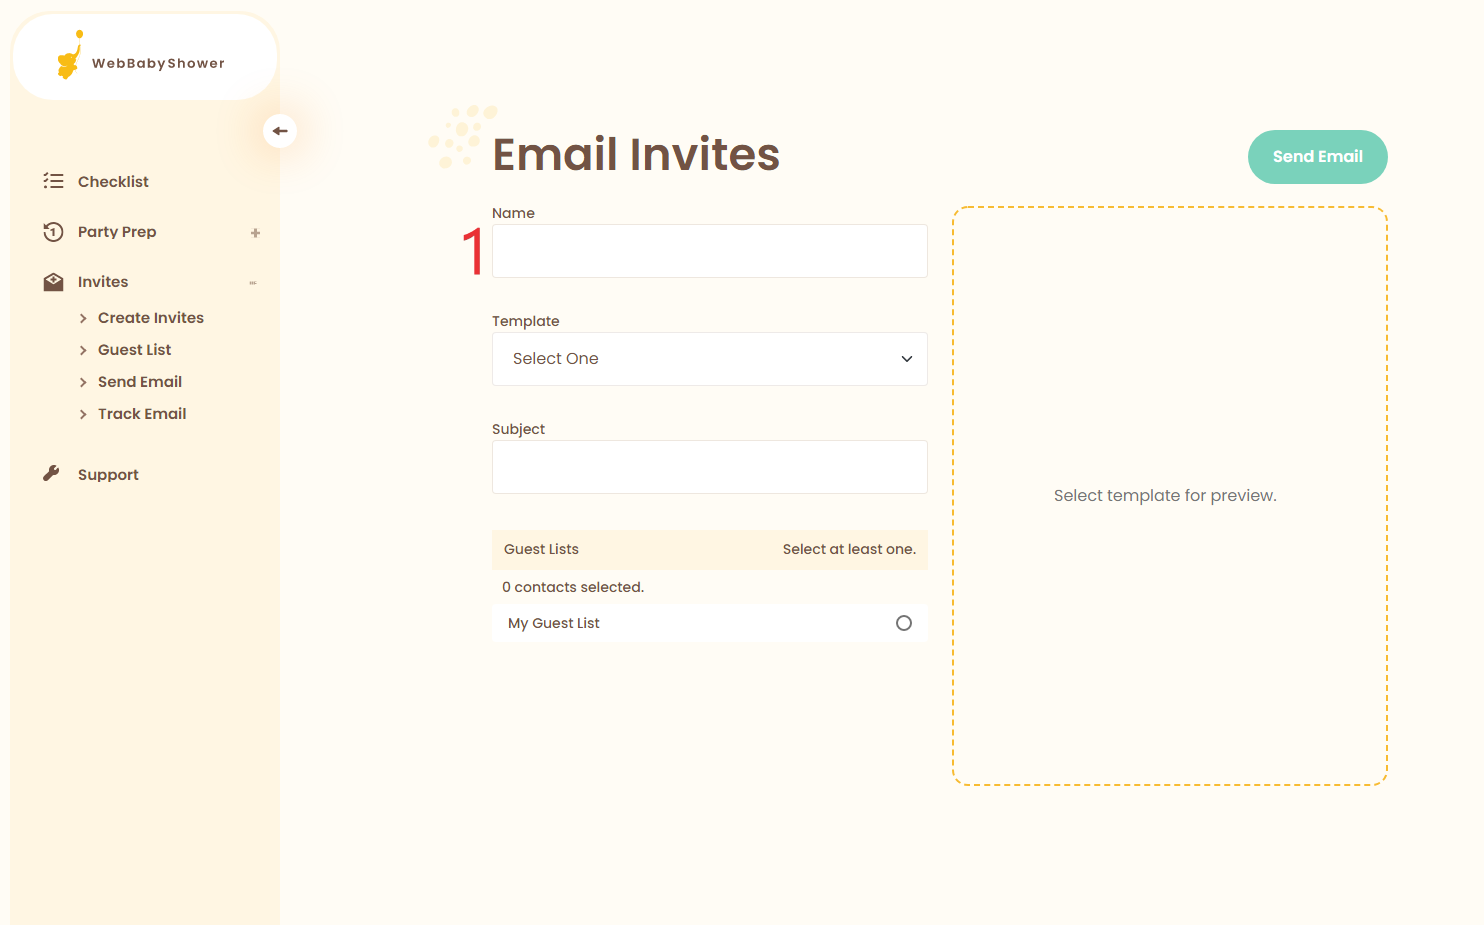 How to Send Email Invitations